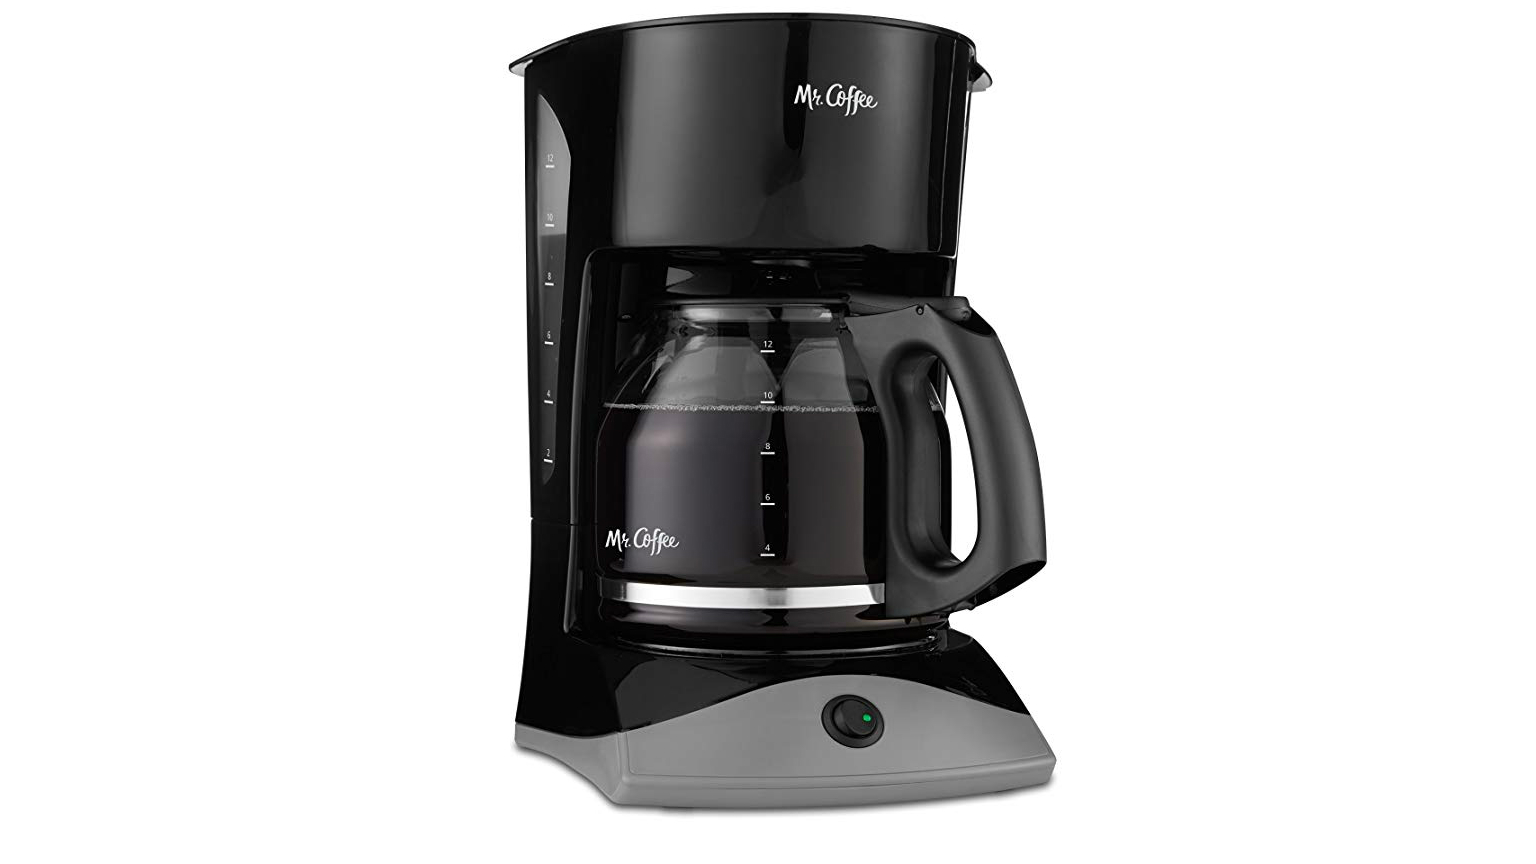 Sale offers of cheap coffee machines